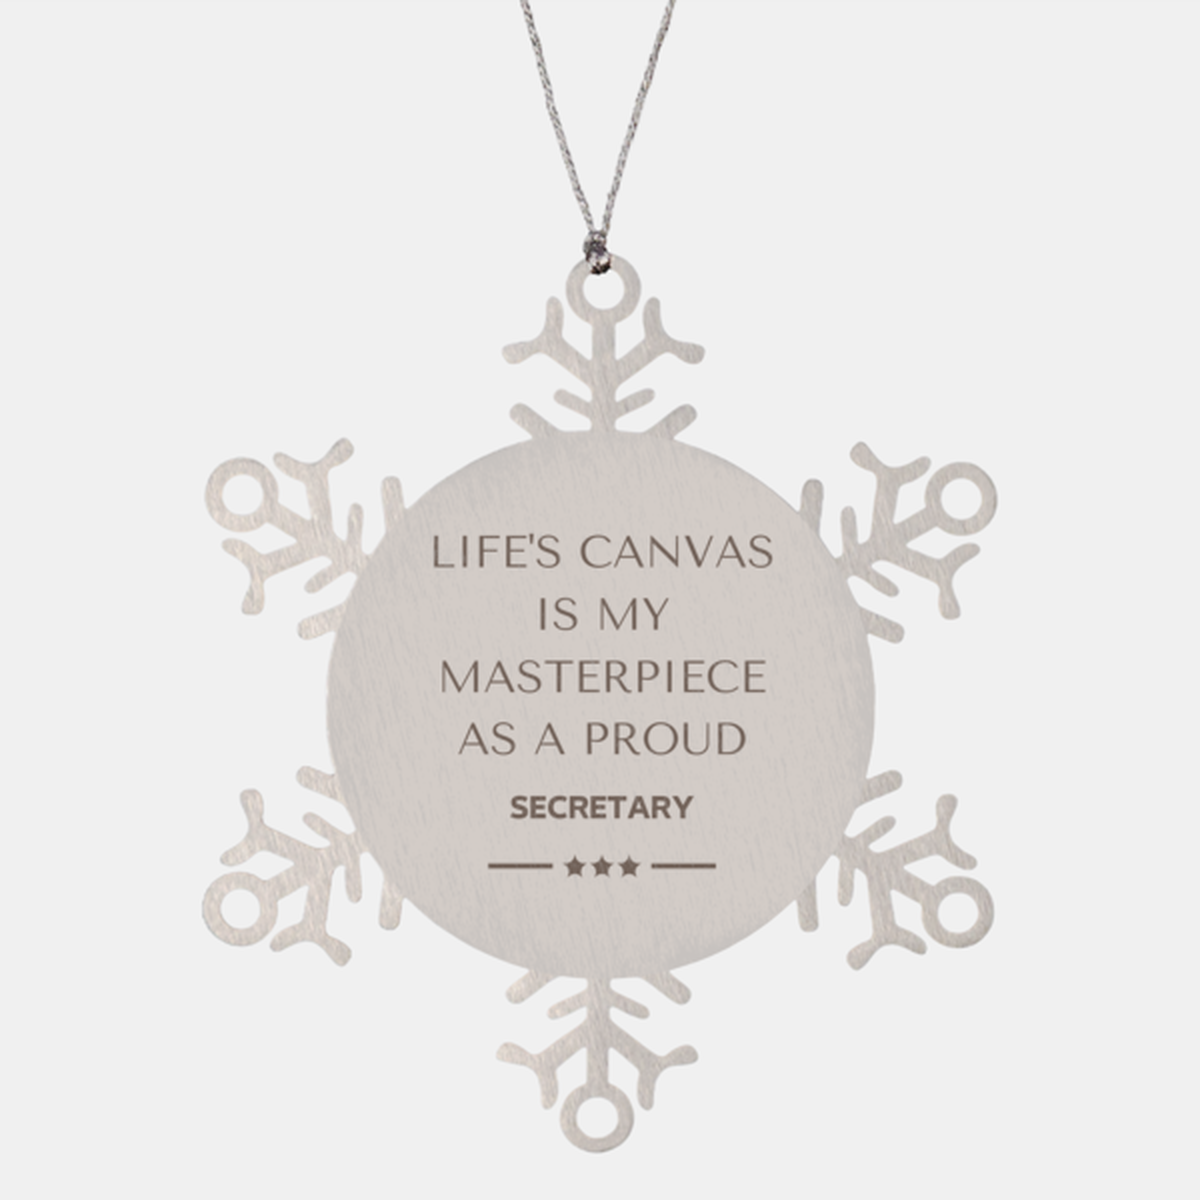 Proud Secretary Gifts, Life's canvas is my masterpiece, Epic Birthday Christmas Unique Snowflake Ornament For Secretary, Coworkers, Men, Women, Friends